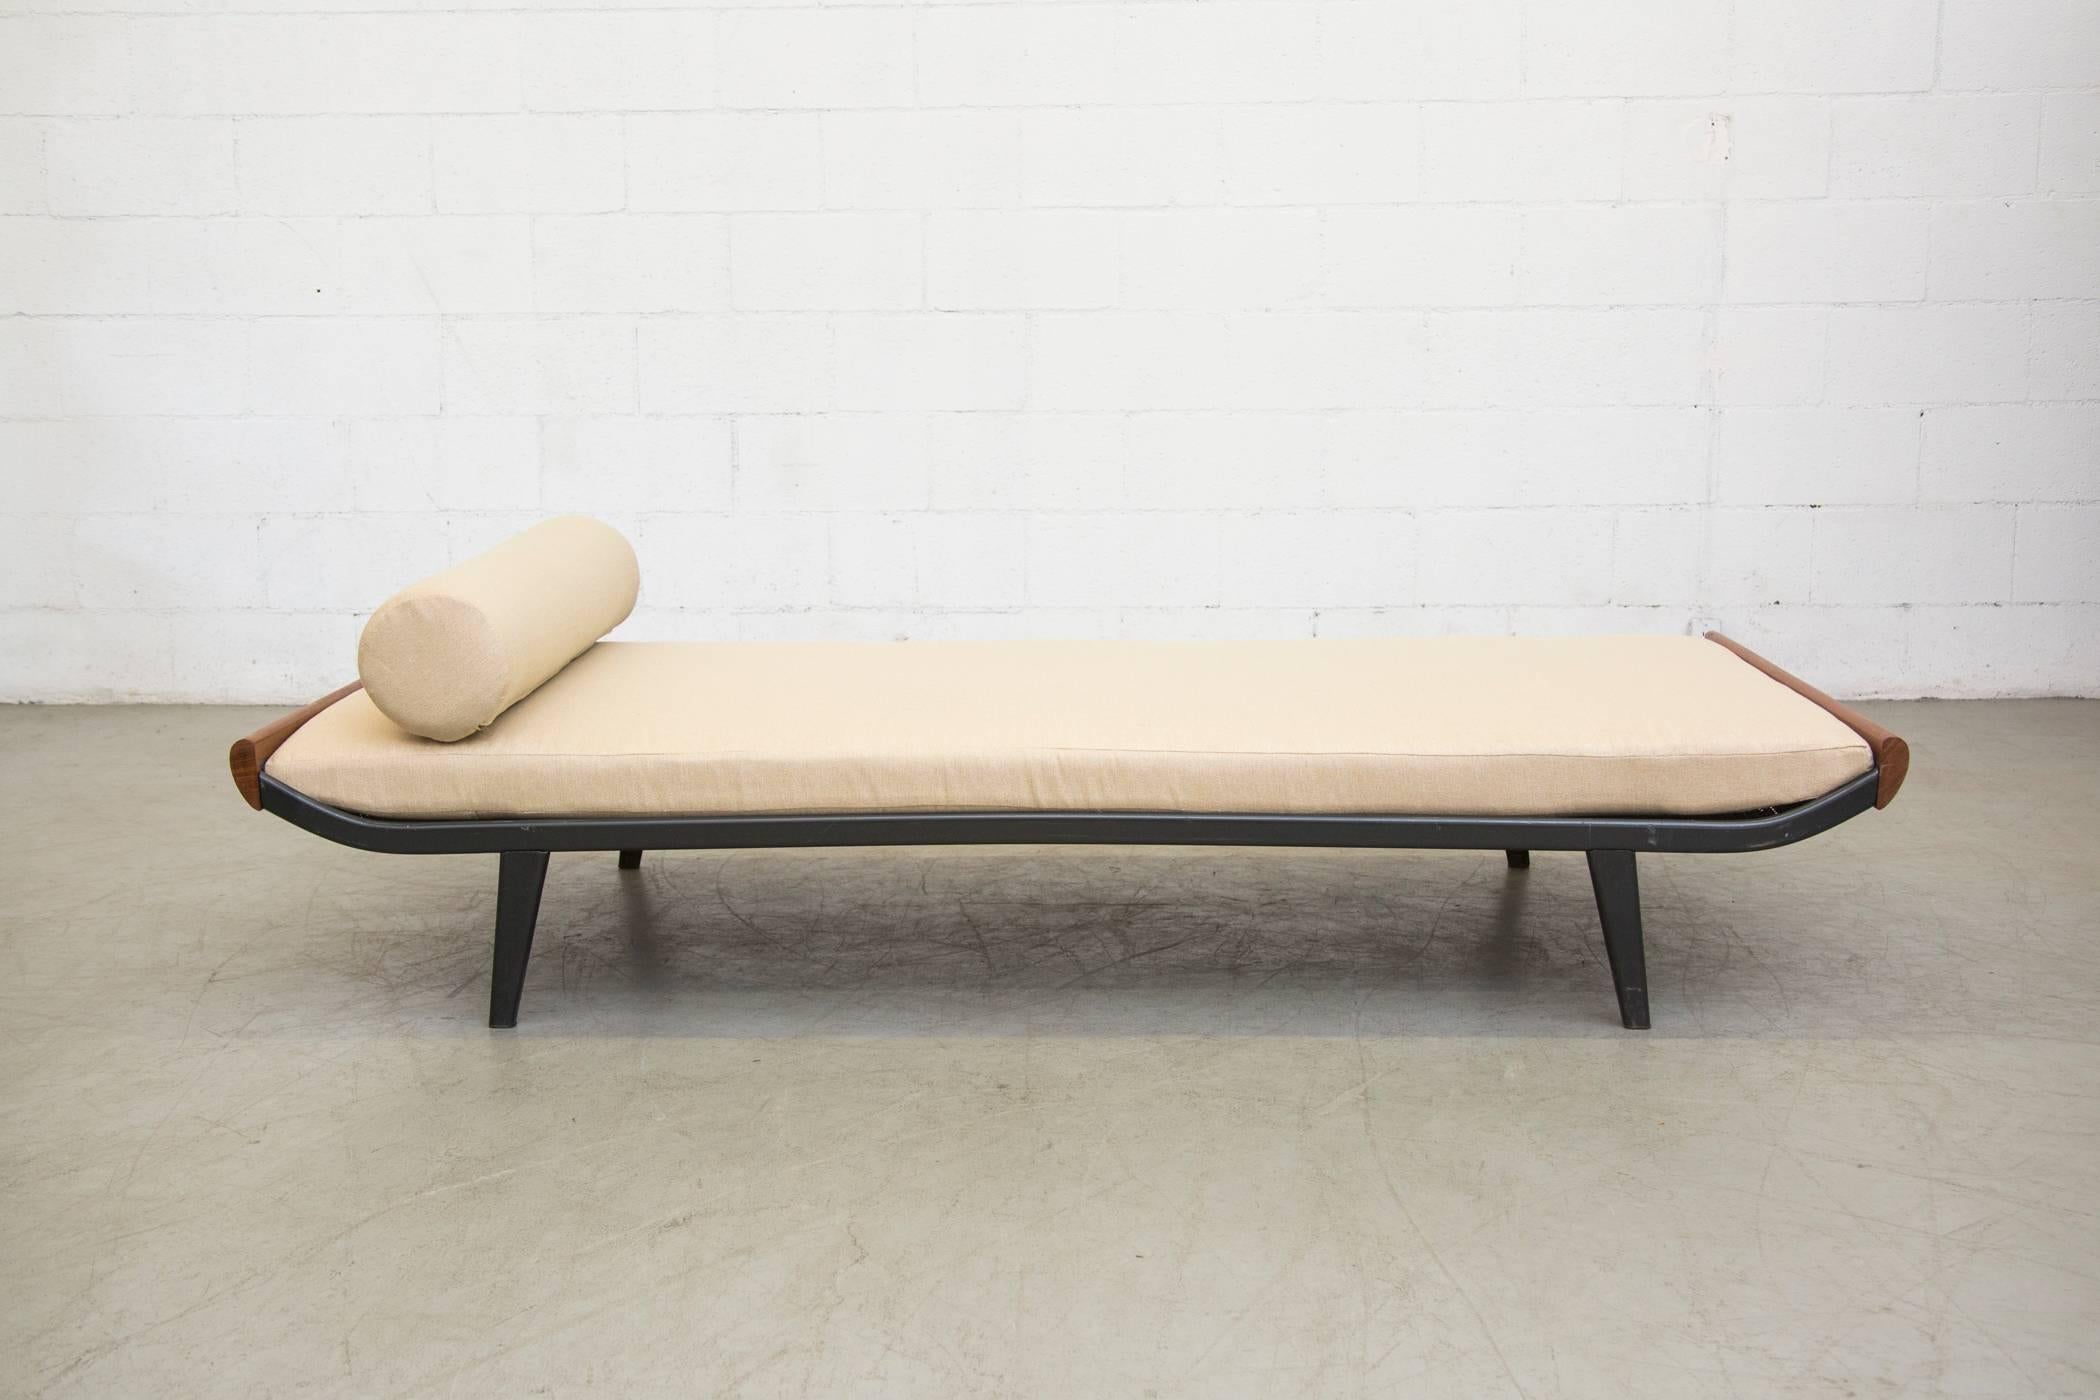 1960s wide version Cleopatra style daybed by A.R. Cordemeyer for Auping with teak ends and dark charcoal grey enameled metal frame and newly custom-made mattress and bolster in froth colored fabric. Frames and wood tone may vary, frames have age